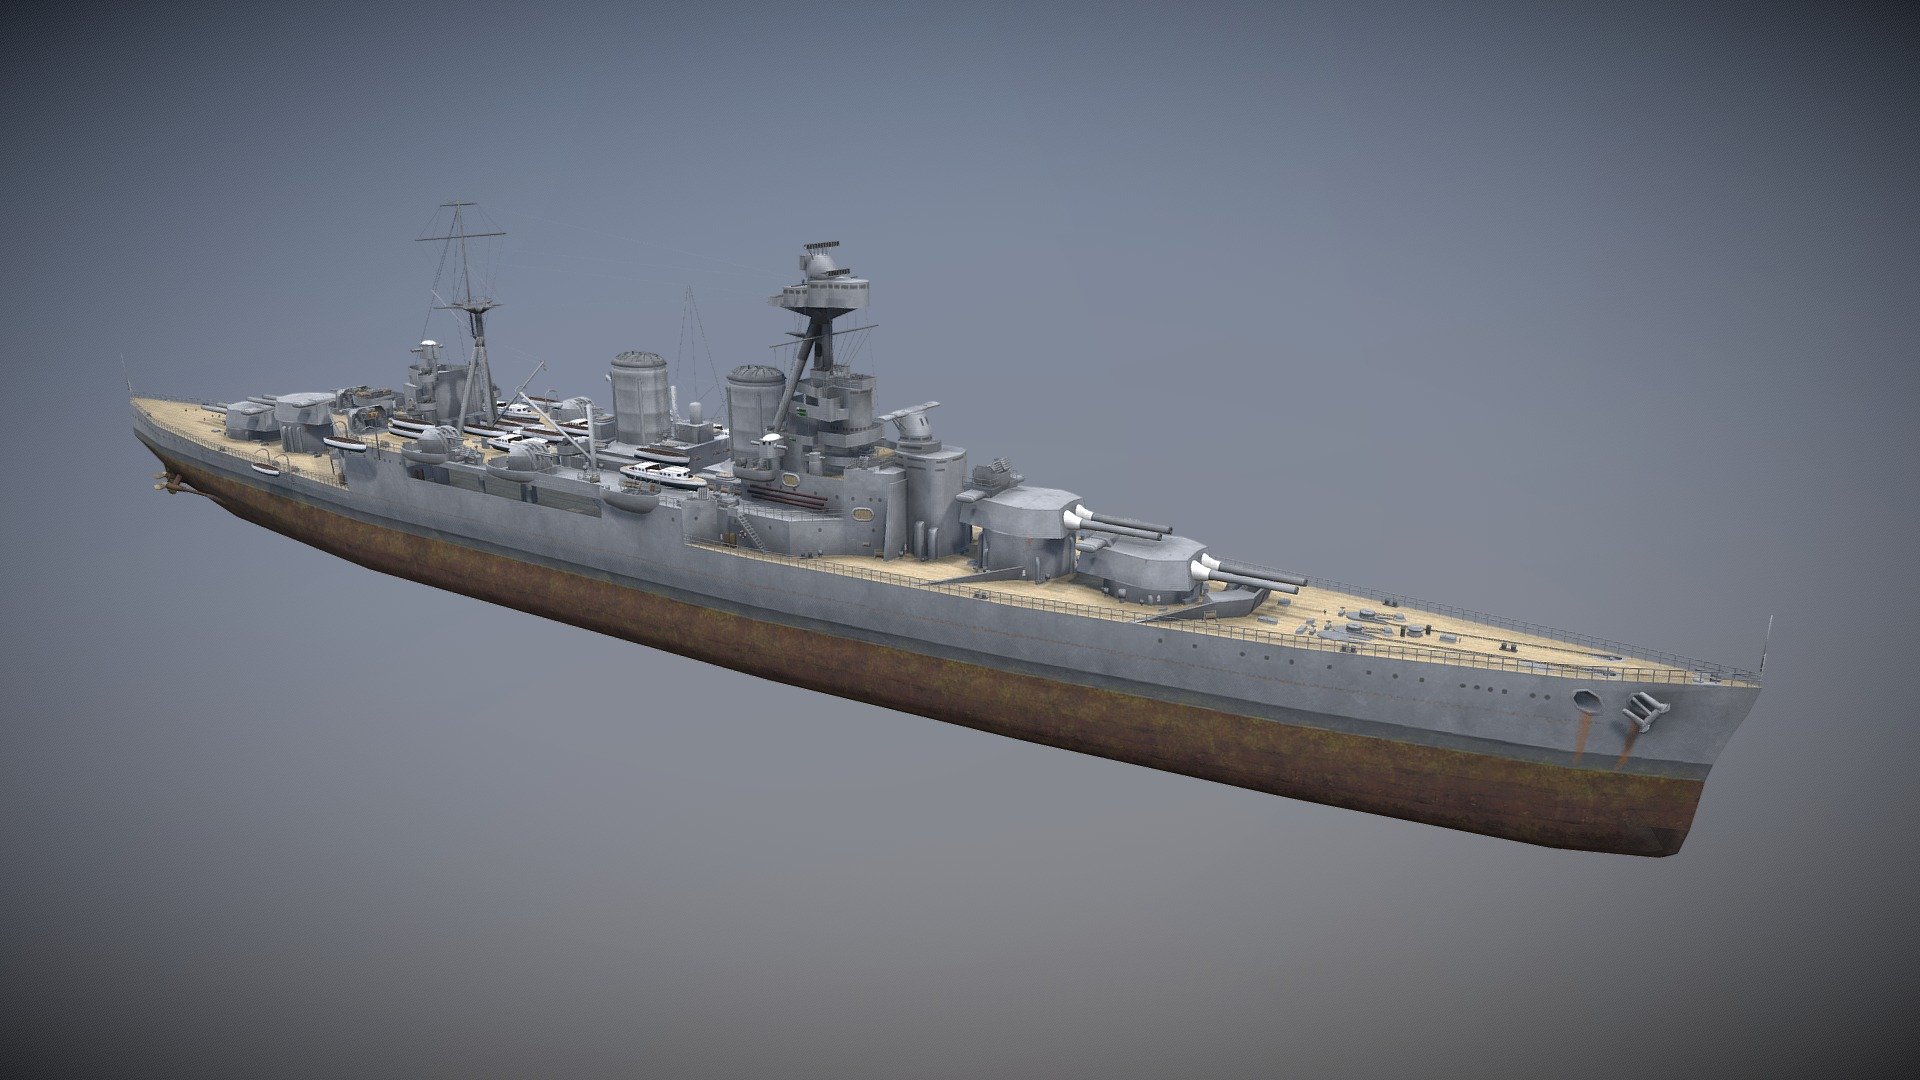 The HMS Hood was a battlecruiser of the Royal Navy in World War 2. She was most famous for her participation in the destruction of the French fleet at Mers-el-Kebir and the Battle of the Denmark Strait, where she was sunk 3d model